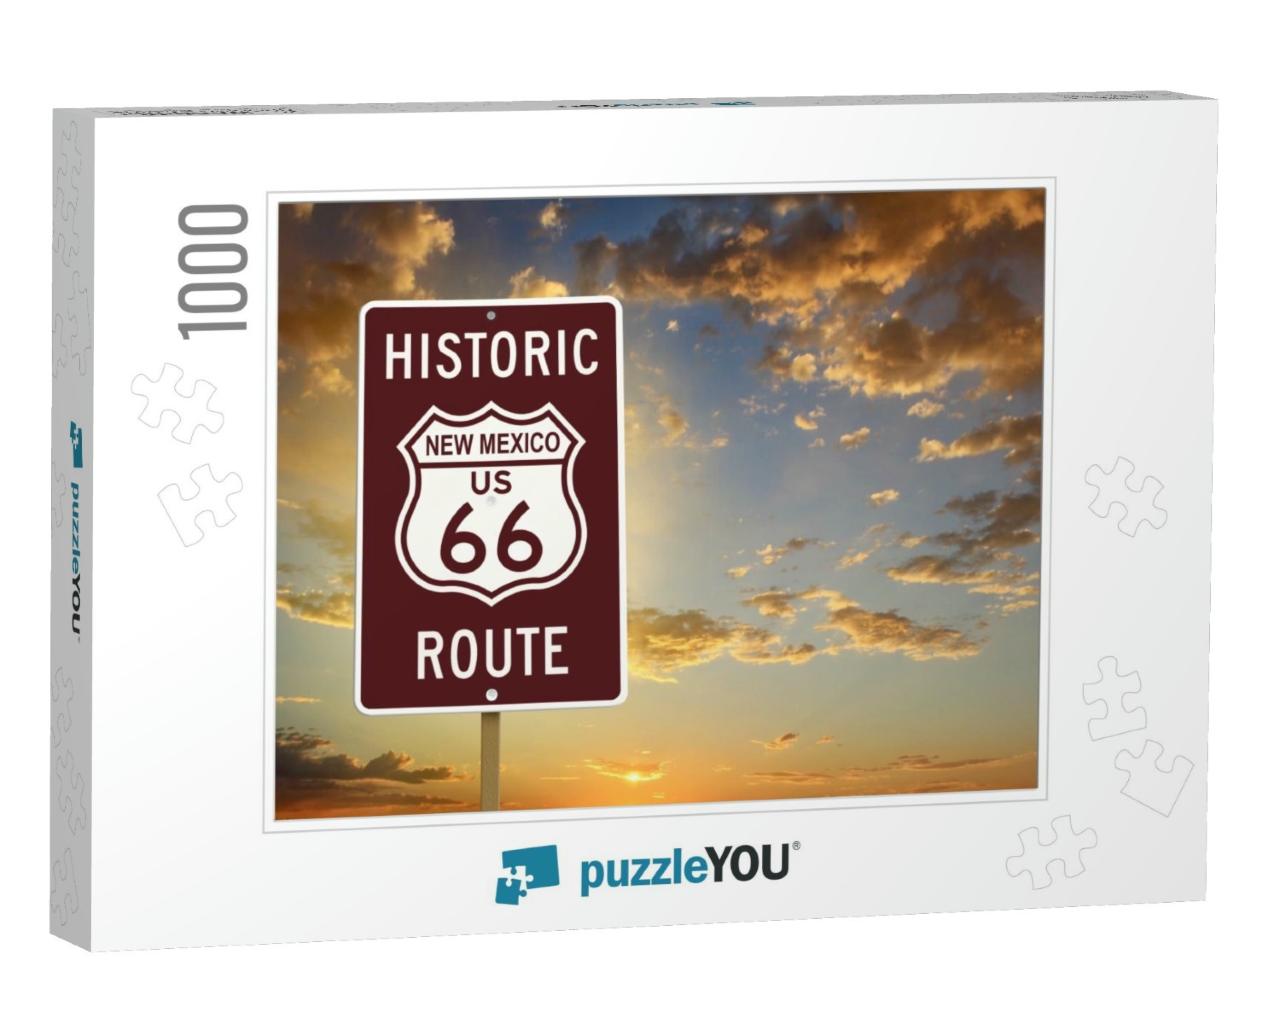 Historic New Mexico Route 66 Brown Sign with Sunset... Jigsaw Puzzle with 1000 pieces